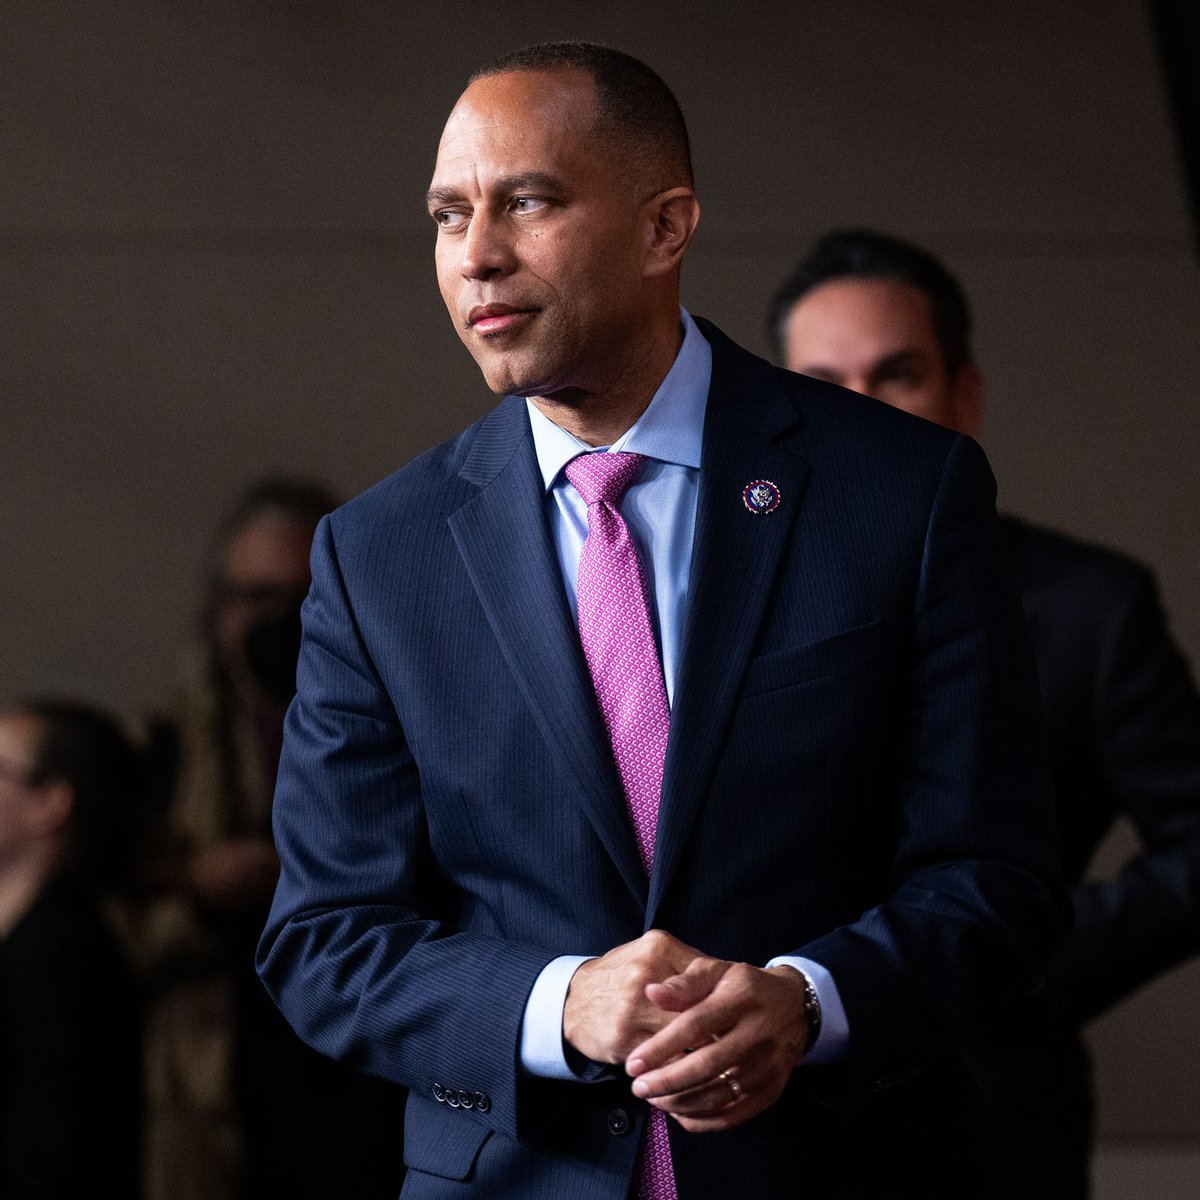 Introducing OUR NEXT SPEAKER, HAKEEM JEFFRIES. Do you SUPPORT JEFFRIES FOR SPEAKER? YES OR NO🇺🇲💙🌊